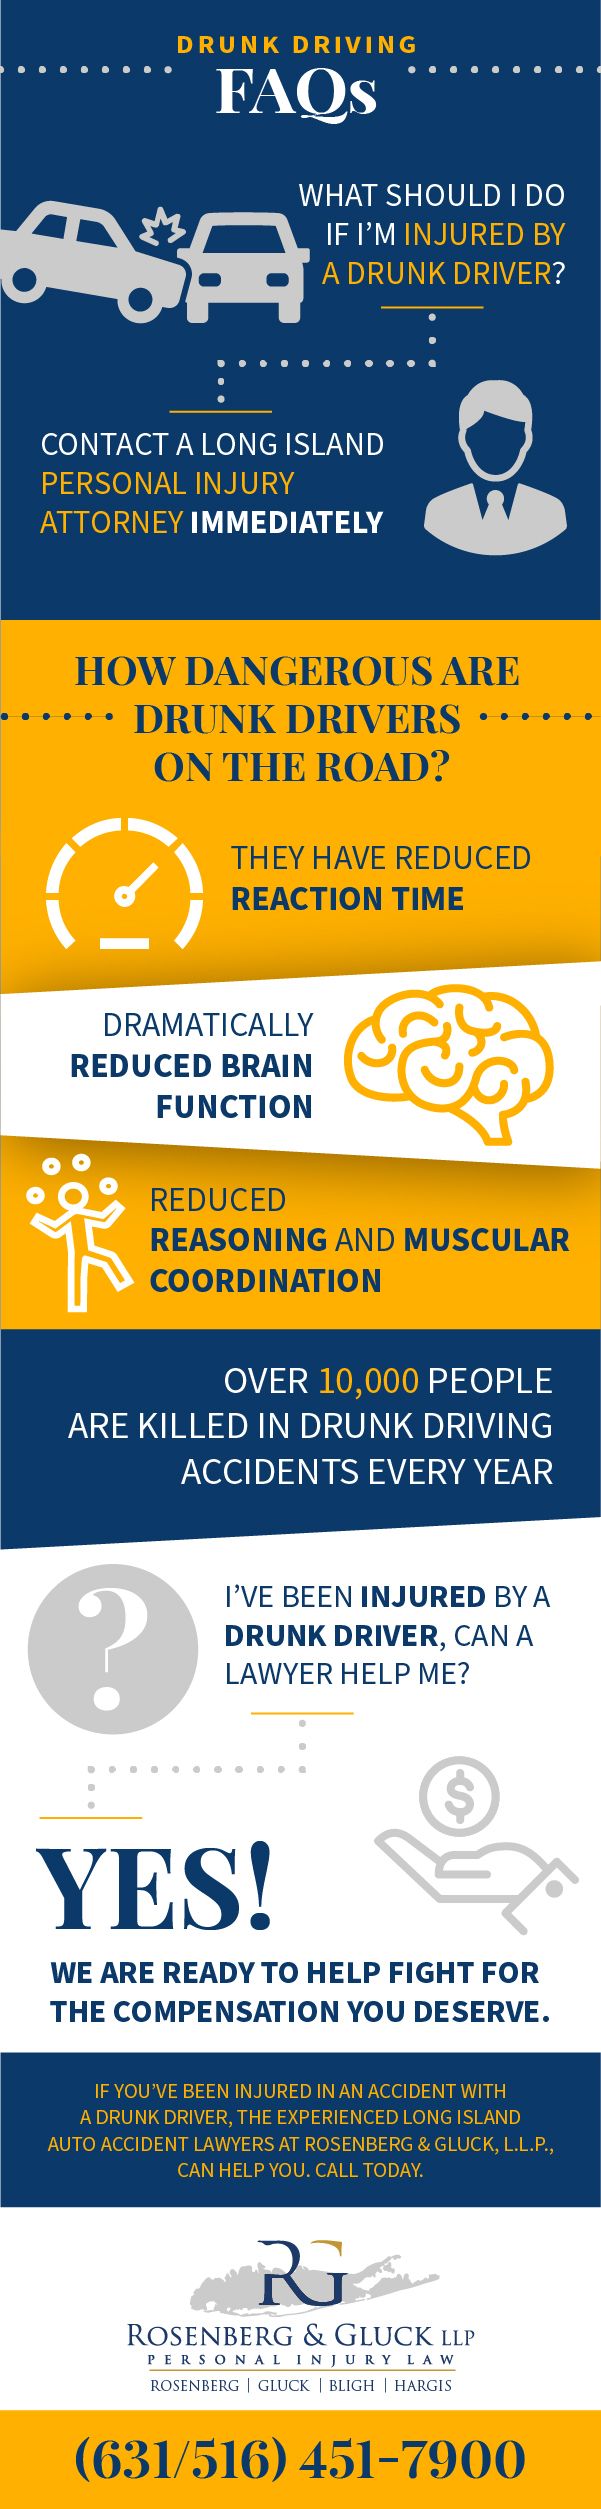 Drunk Driving FAQs Infographic